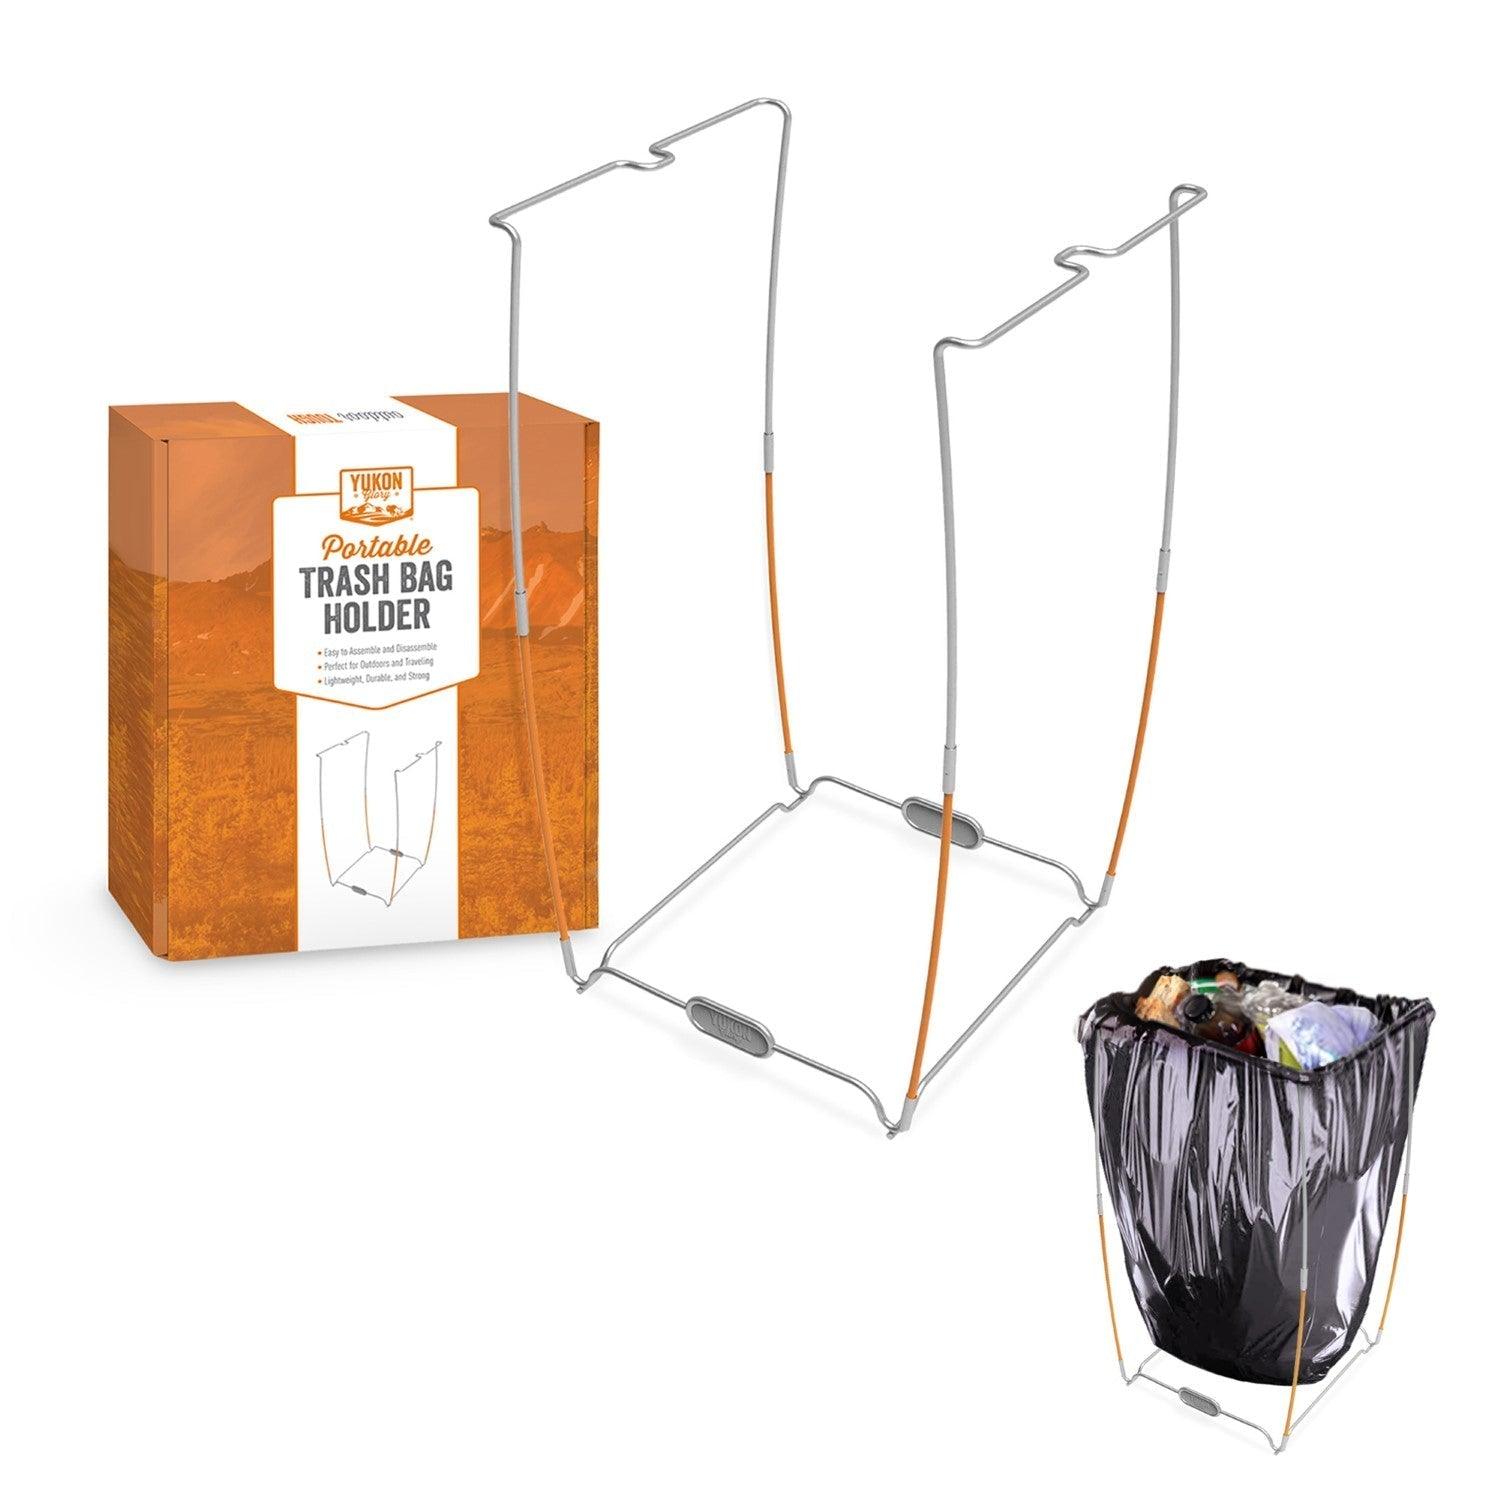 Bag Buddy Bag Holder - Adjustable Metal Support Stand for All Plastic and  Paper Garbage Bag Sizes - Use for Leaves, Yard Work, Laundry, Trash and  More | Yard work, Garbage bag,